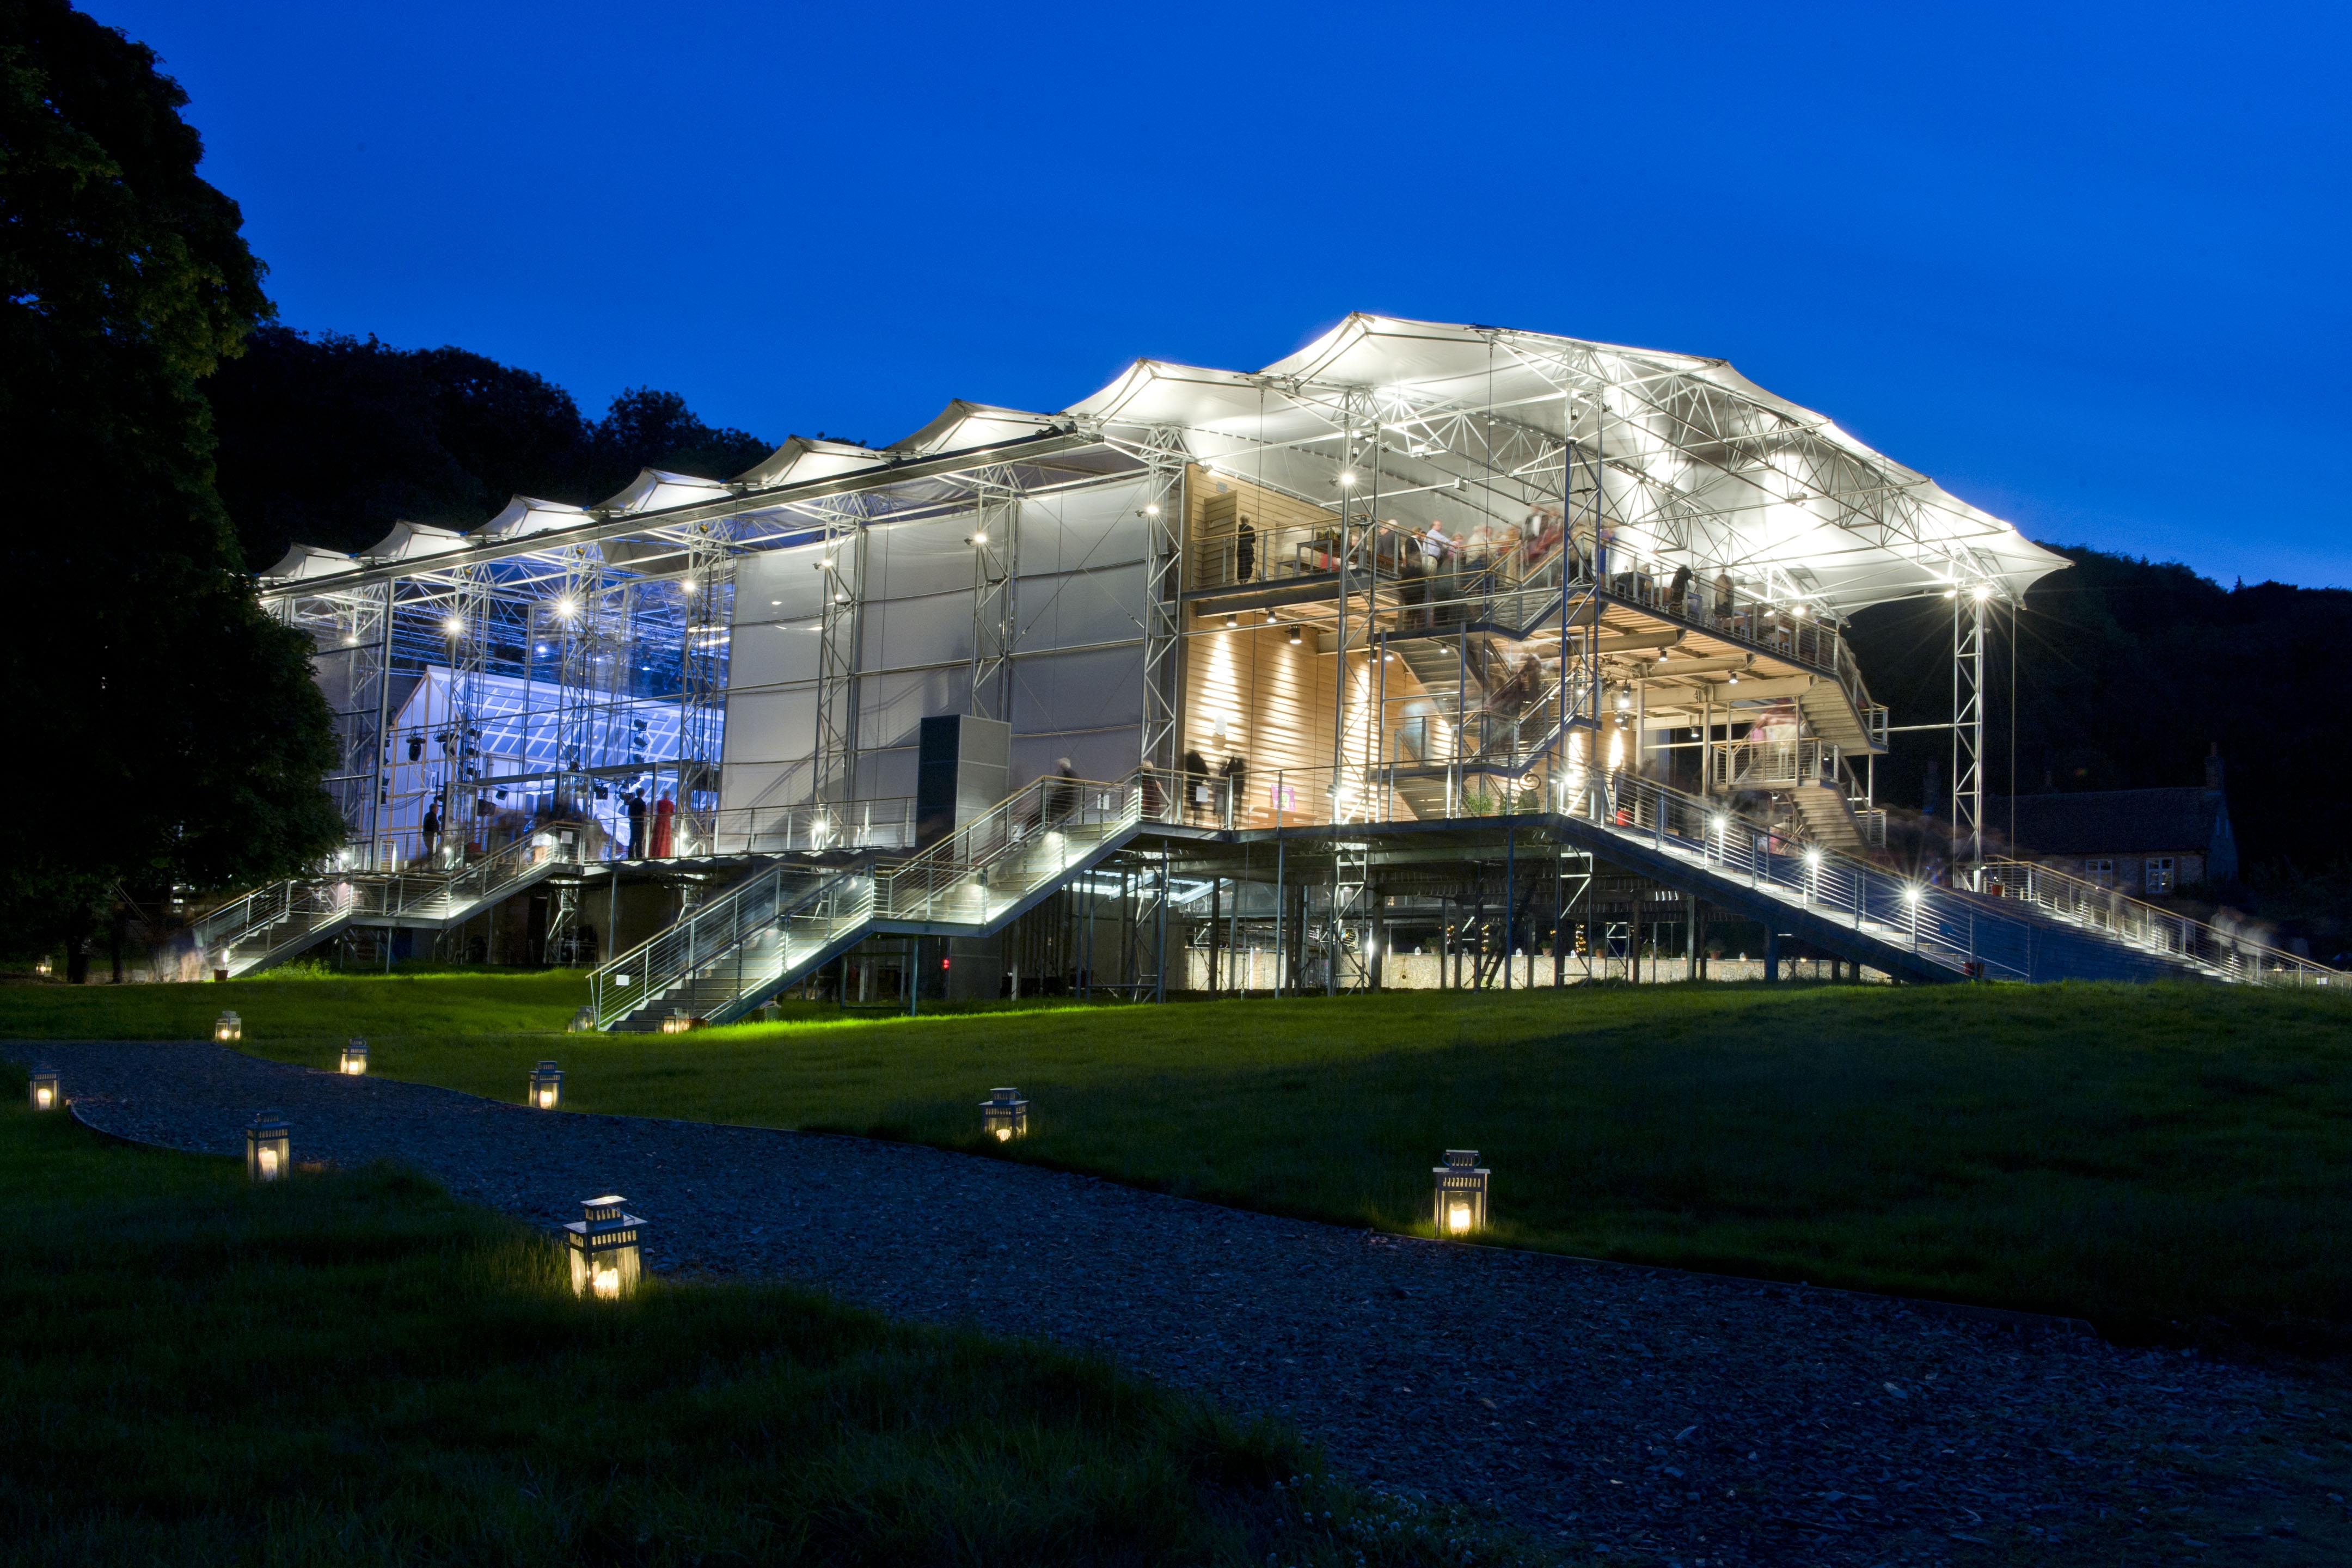 The summer opera house at Garsington rises from the gardens. Photograph: Mike Hoban